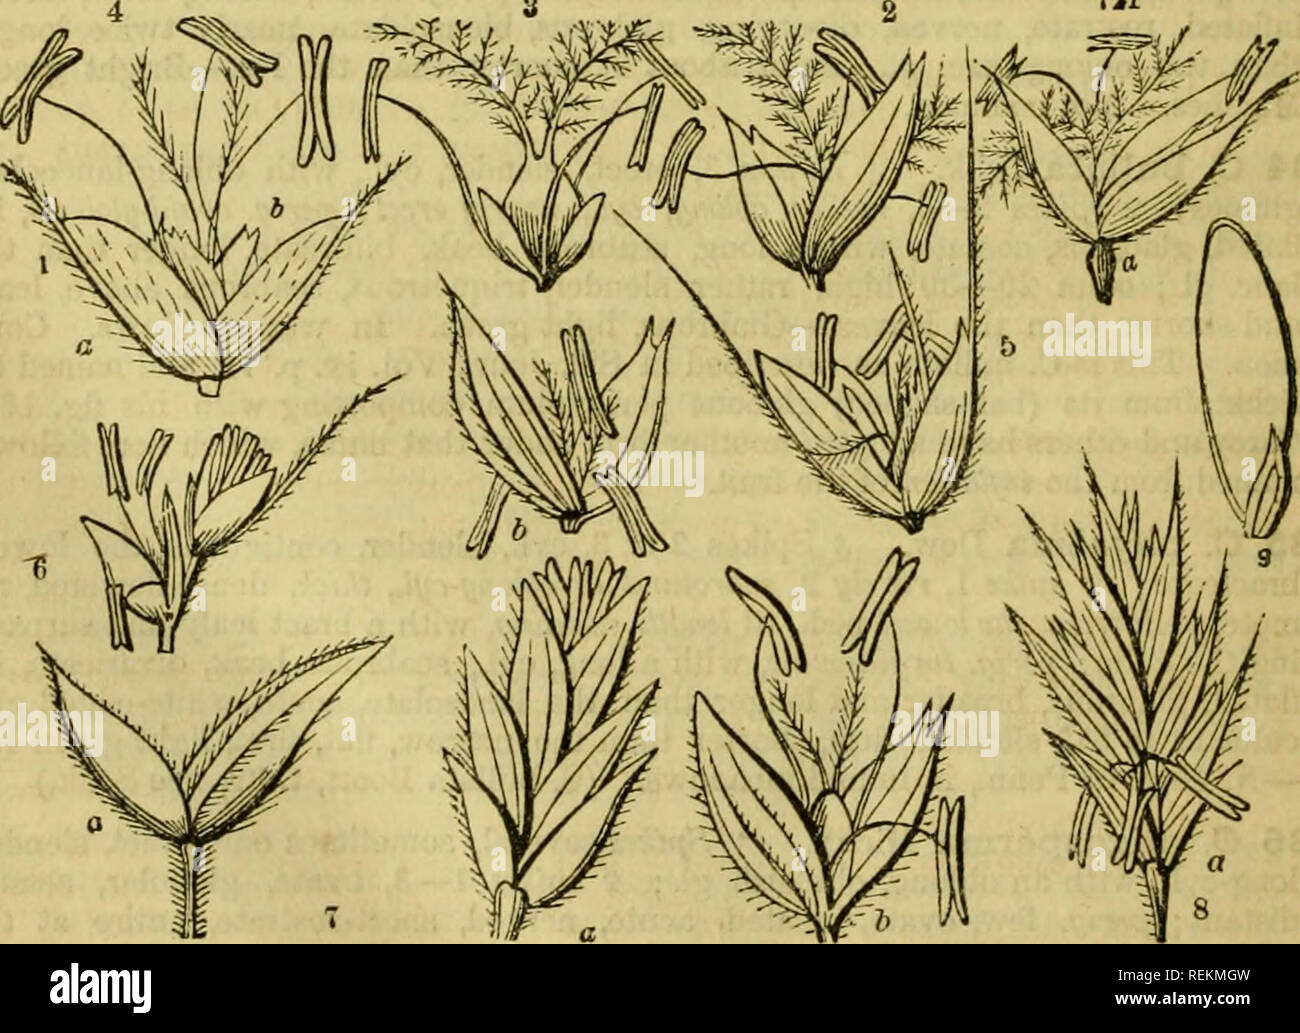 . Class-book of botany: being outlines of the structure, physiology and classification of plants; with a flora of the United States and Canada. Botany; Plants; Plants. i70 Obdkr 156.âGRAMTNEJS. Order CLVI. GRAMINE^E. Grasses. Herbs, rarely woody or arborescent, with (mostly) hollow, jointed culms; with leaves alternate, distychous. on tubular sheaths split down to the nodes, and a licfula (stipules) of membranous texture where the leaf joins the sheath. Flowers in little .spikelets of 1 or several, with glumes distychously arranged, and collected into spikes,, racemes or panicles. Glumes, the  Stock Photo